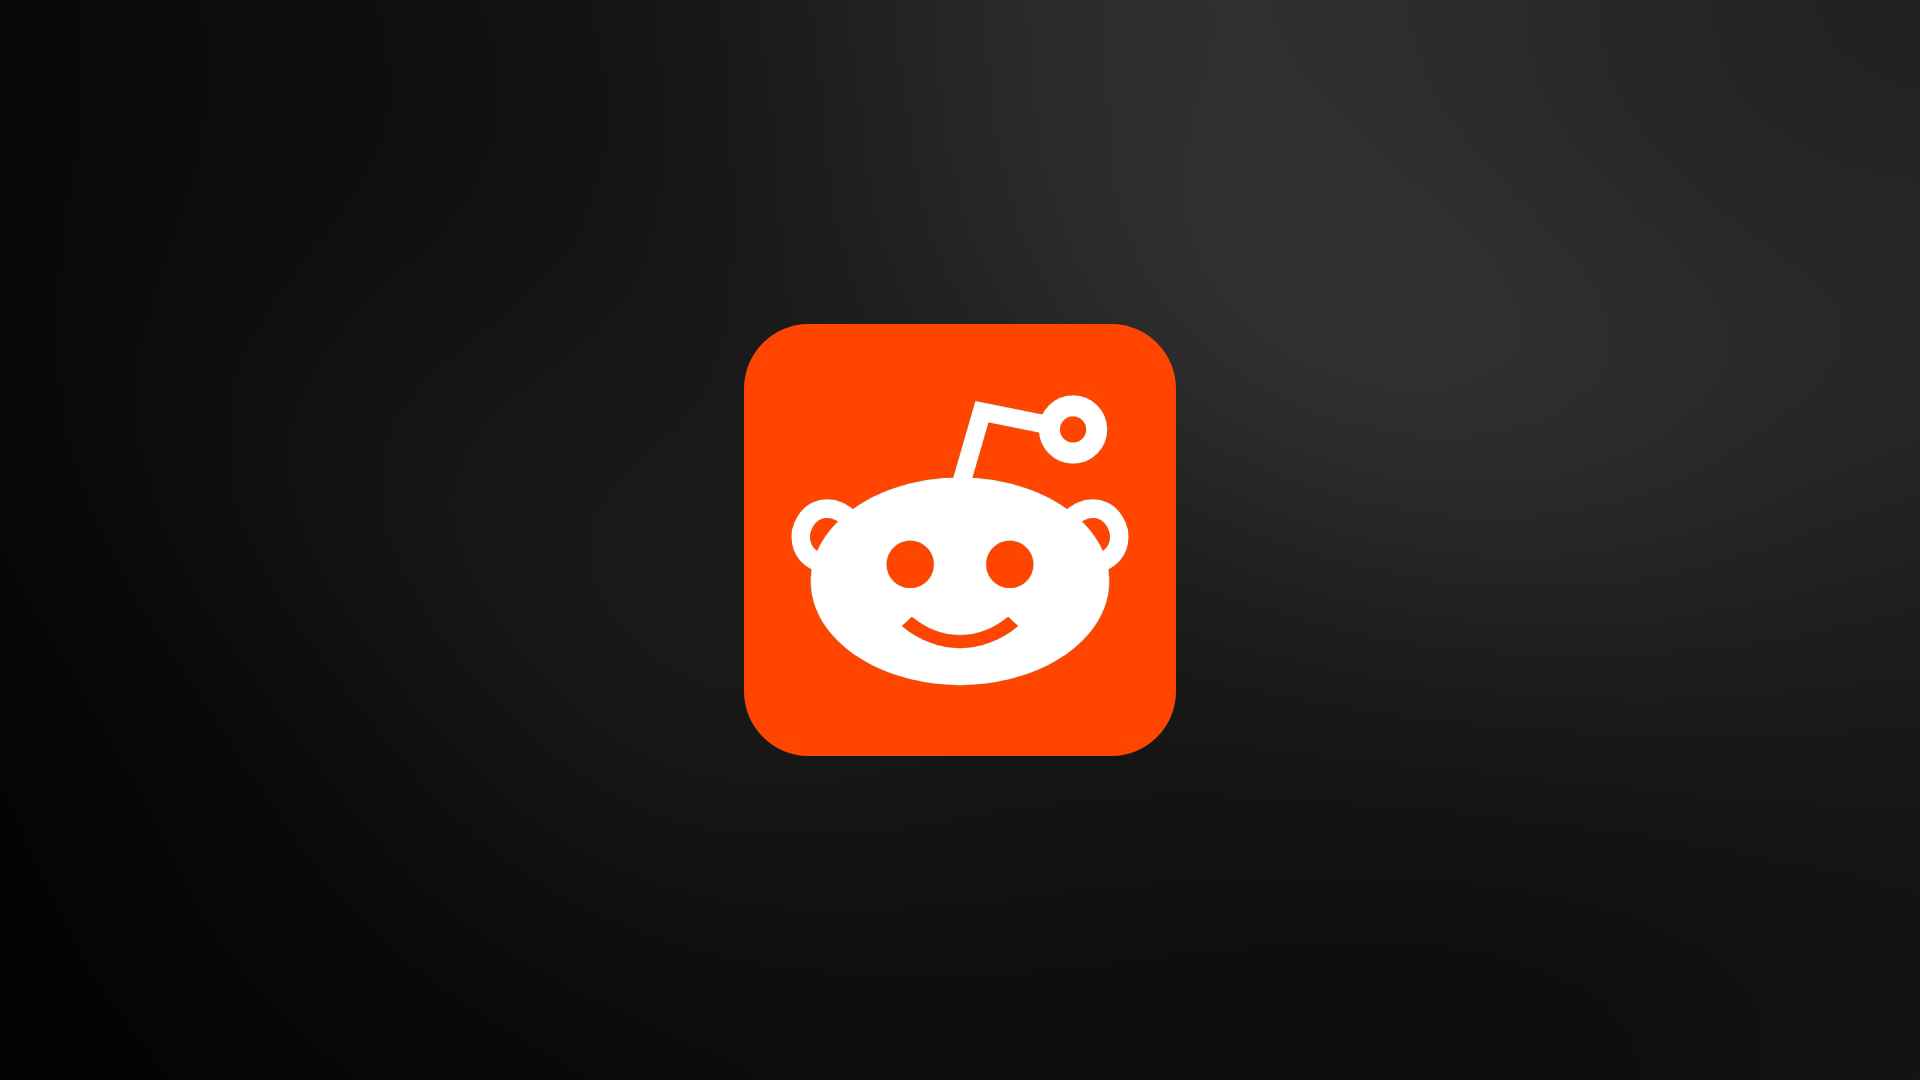 How does Reddit handle copyright infringement or intellectual property violations?